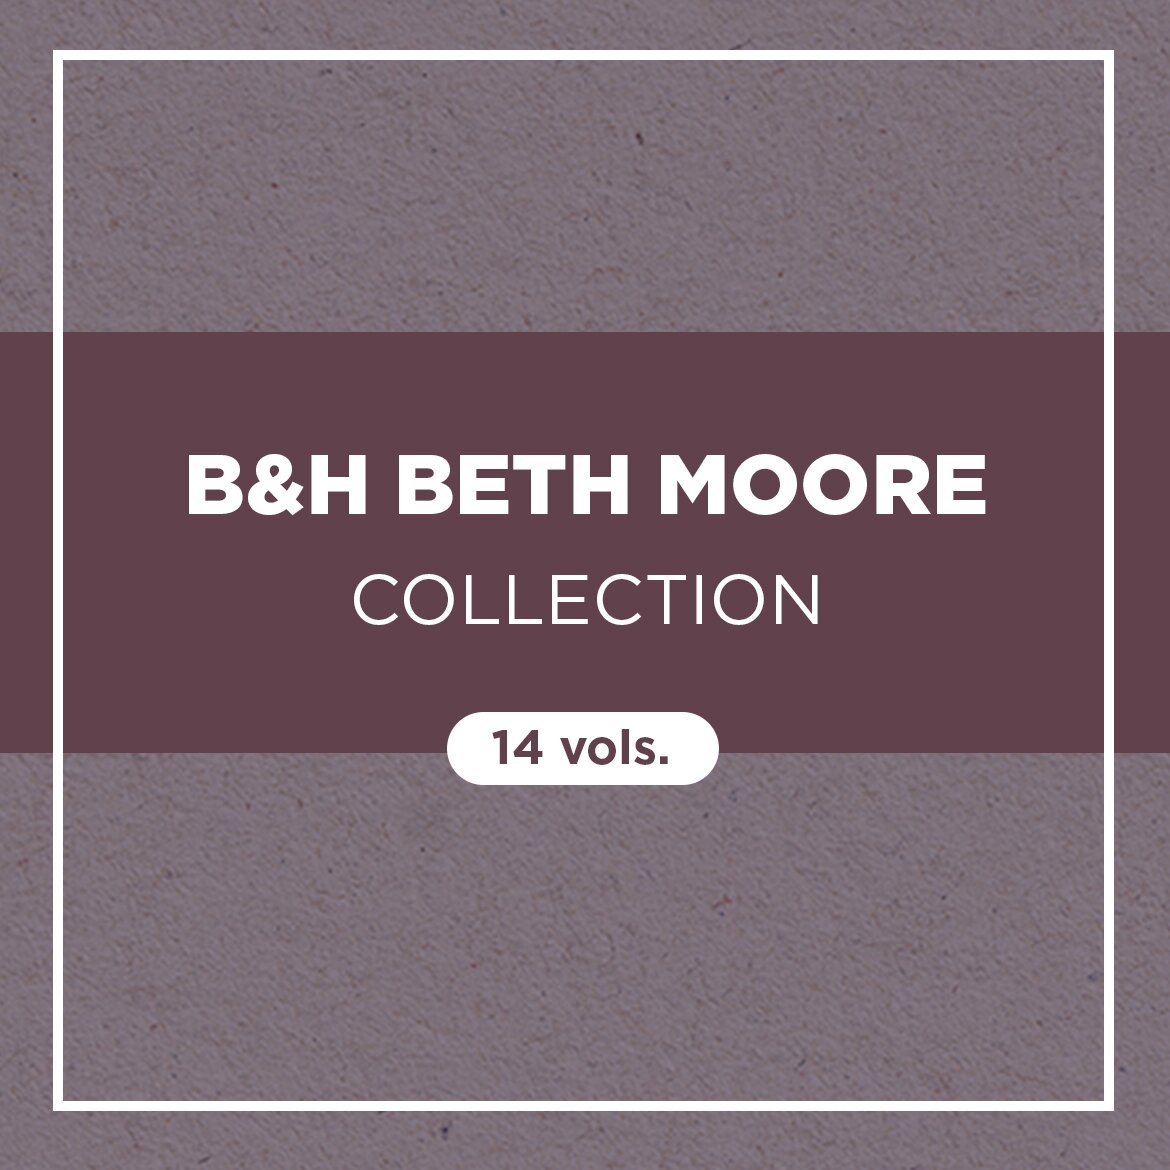 B&H Beth Moore Collection (14 vols.)